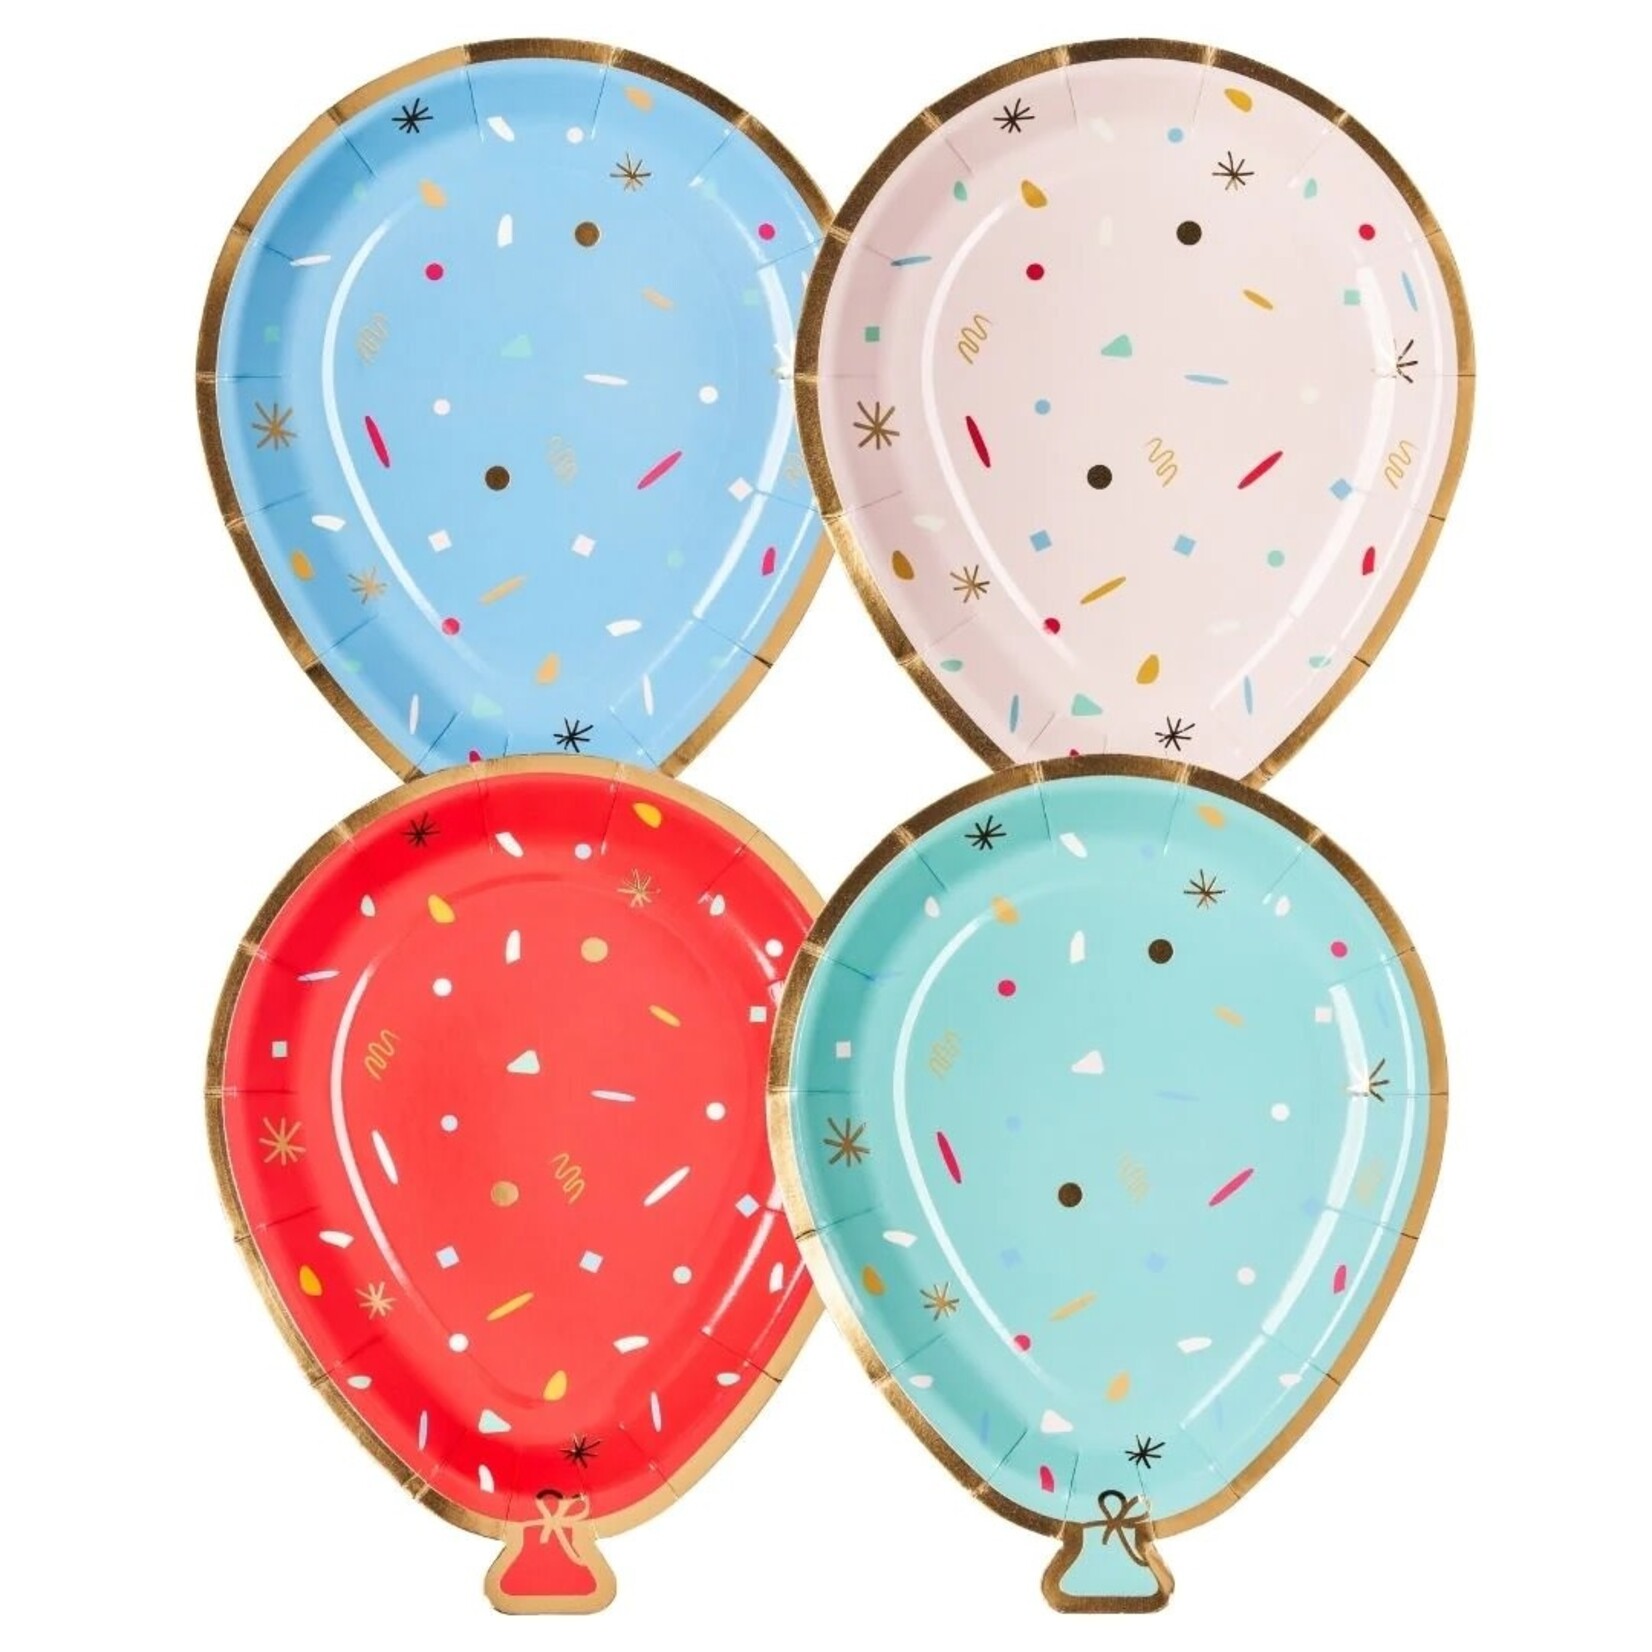 Sophistiplate/Simply Baked Balloon Salad Plate Lets Celebrate Assorted/8pkg